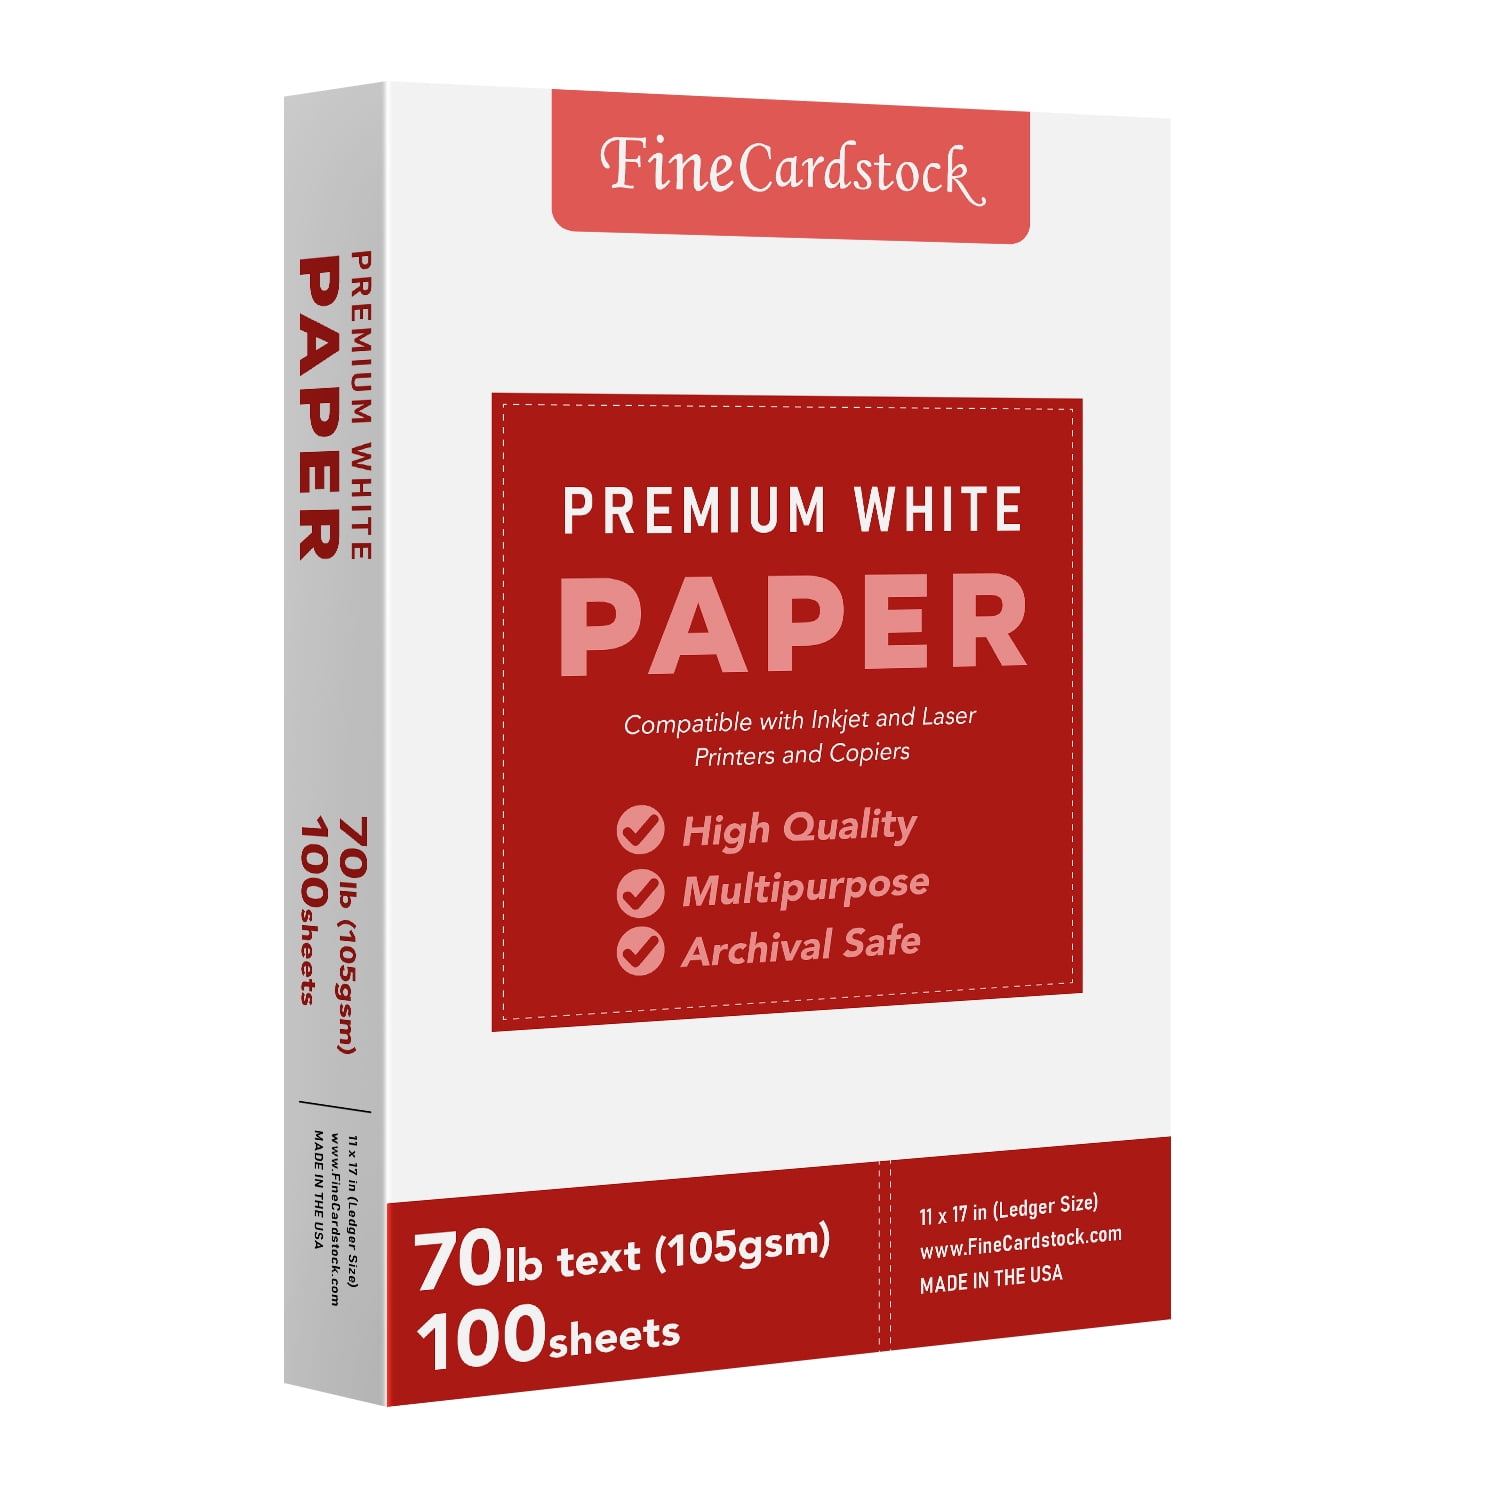 Premium A4 Paper: Unmatched Quality and Versatility for Your